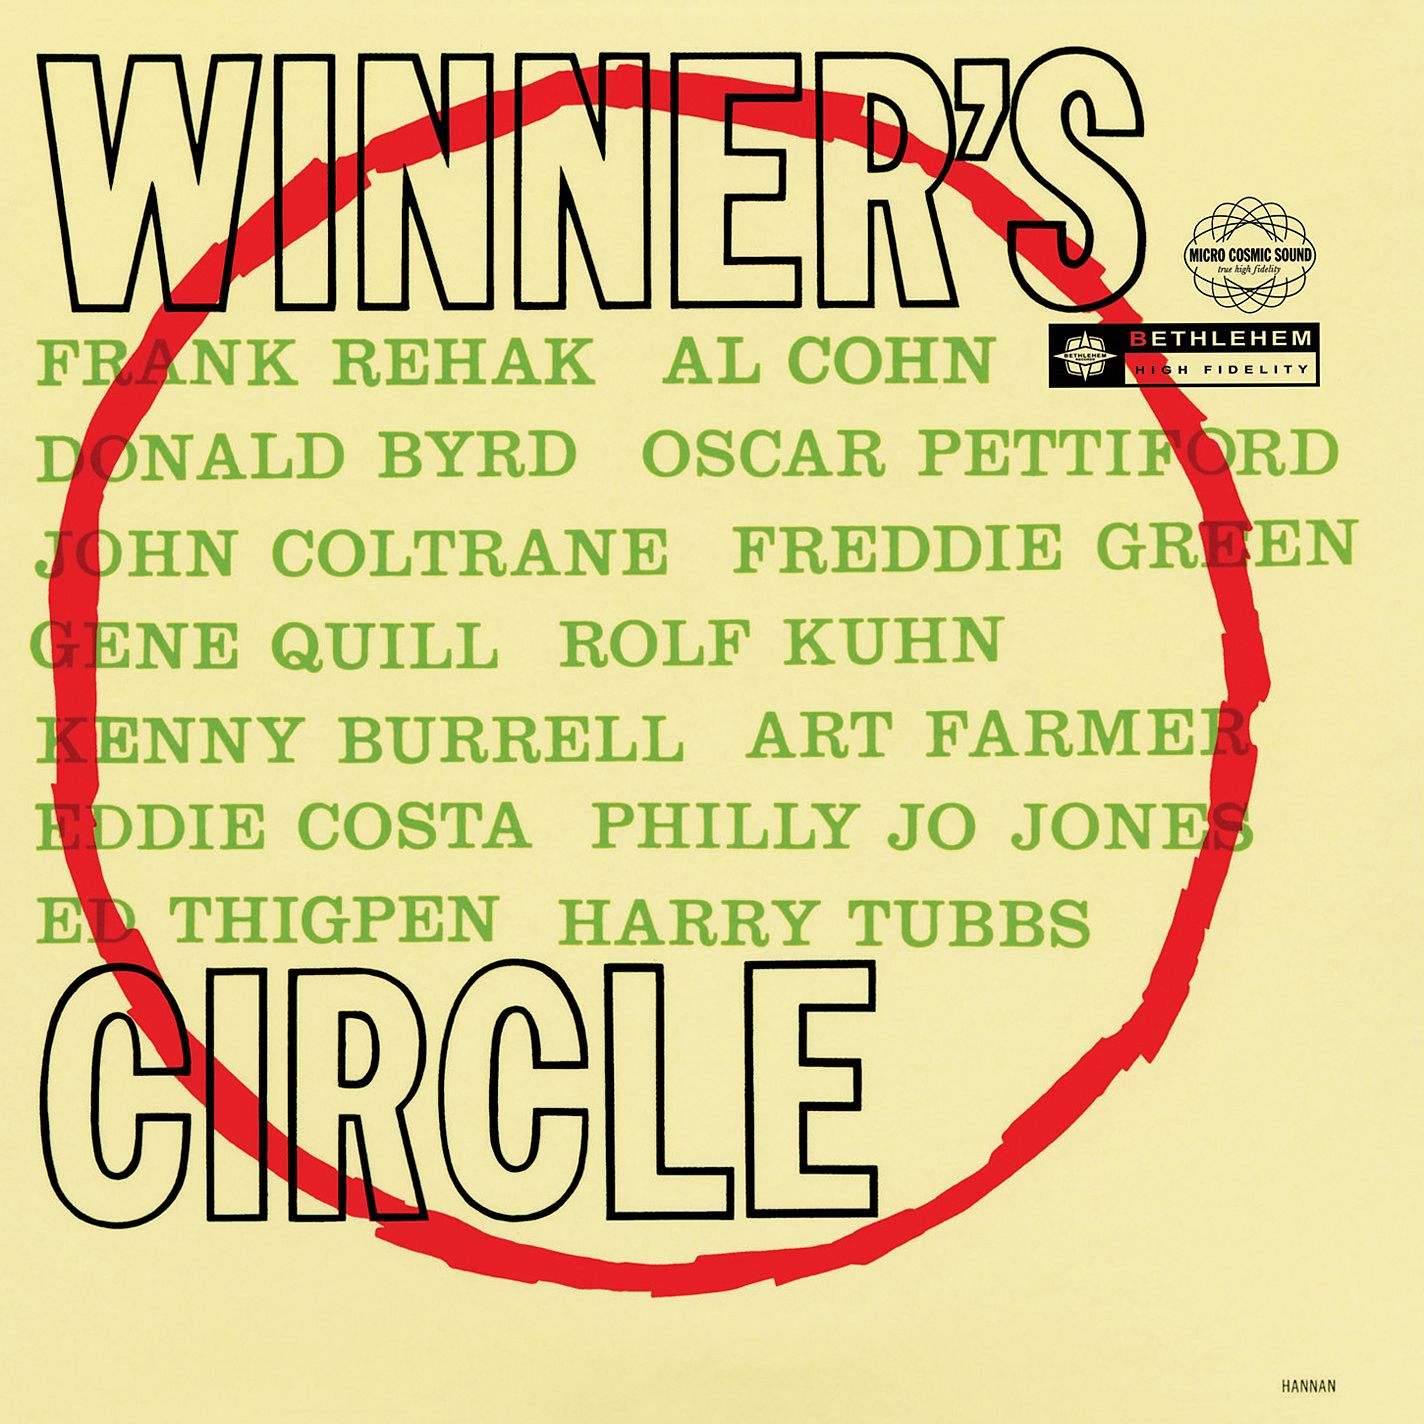 Various Artists – In The Winner’s Circle (Remastered 2013) (1958/2013) [Official Digital Download 24bit/96kHz]